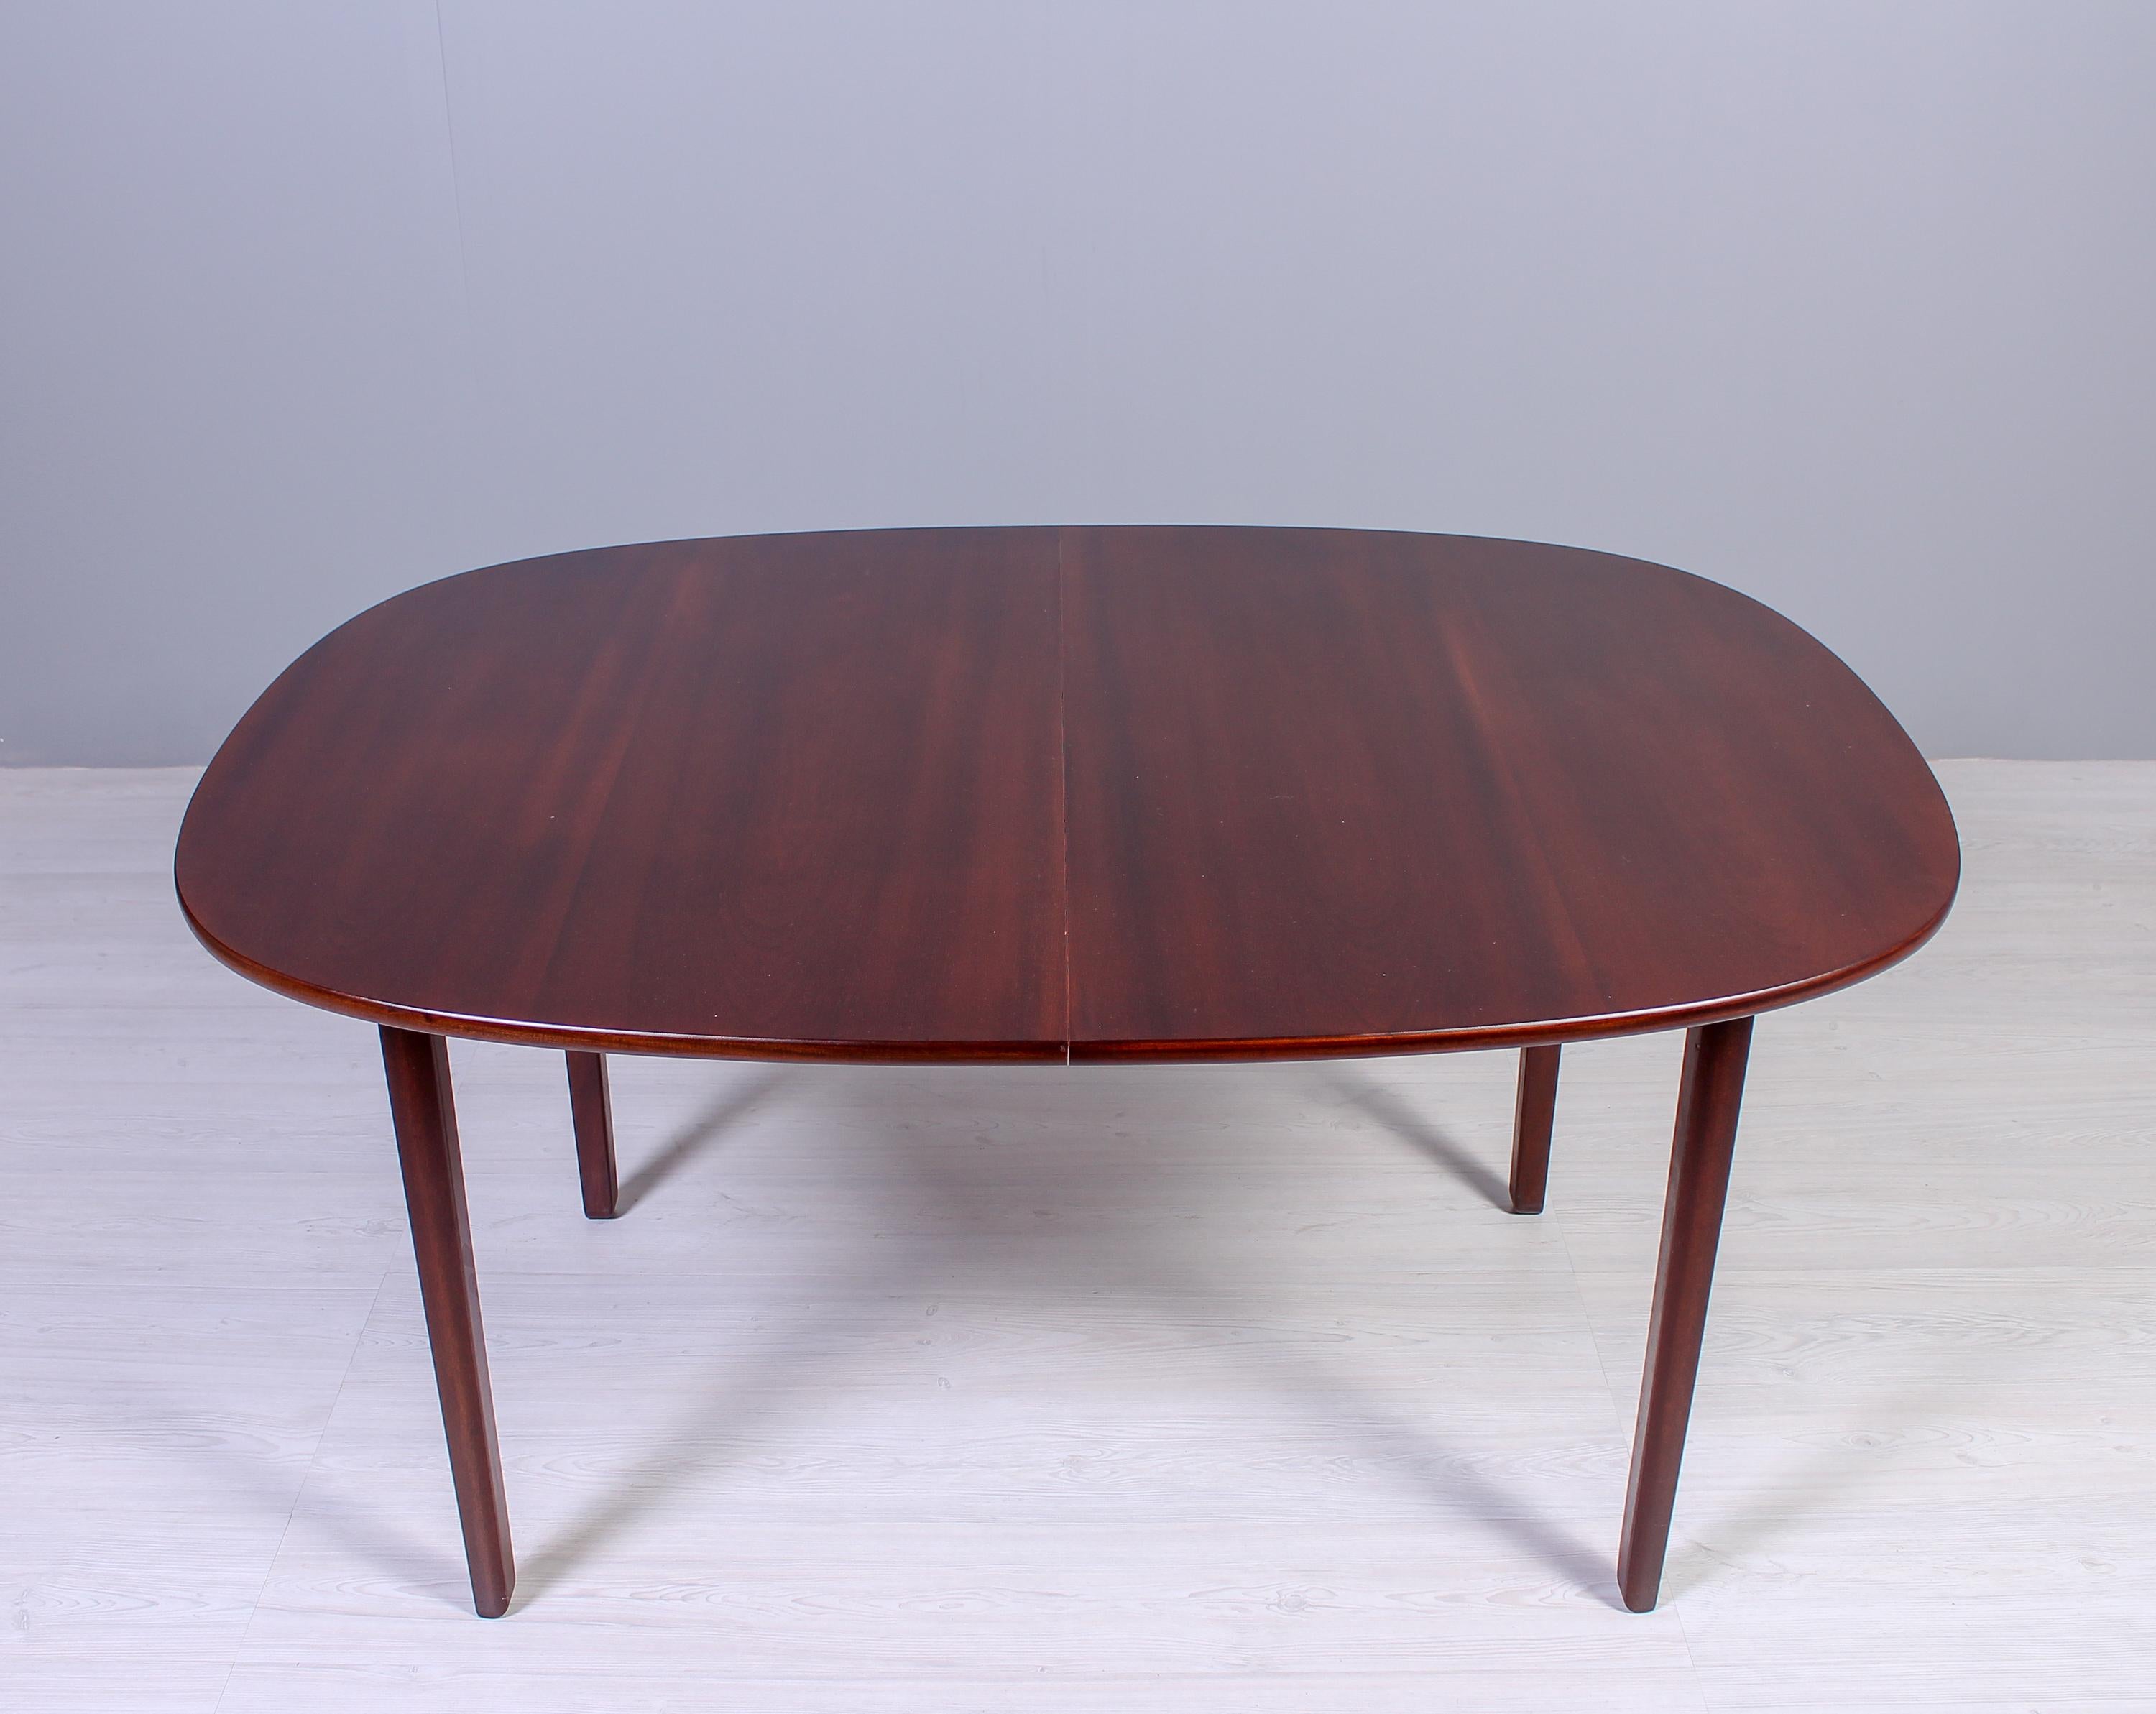 Scandinavian Modern Ole Wanscher Mahogany Rungstedlund Dining Table, 1960s For Sale